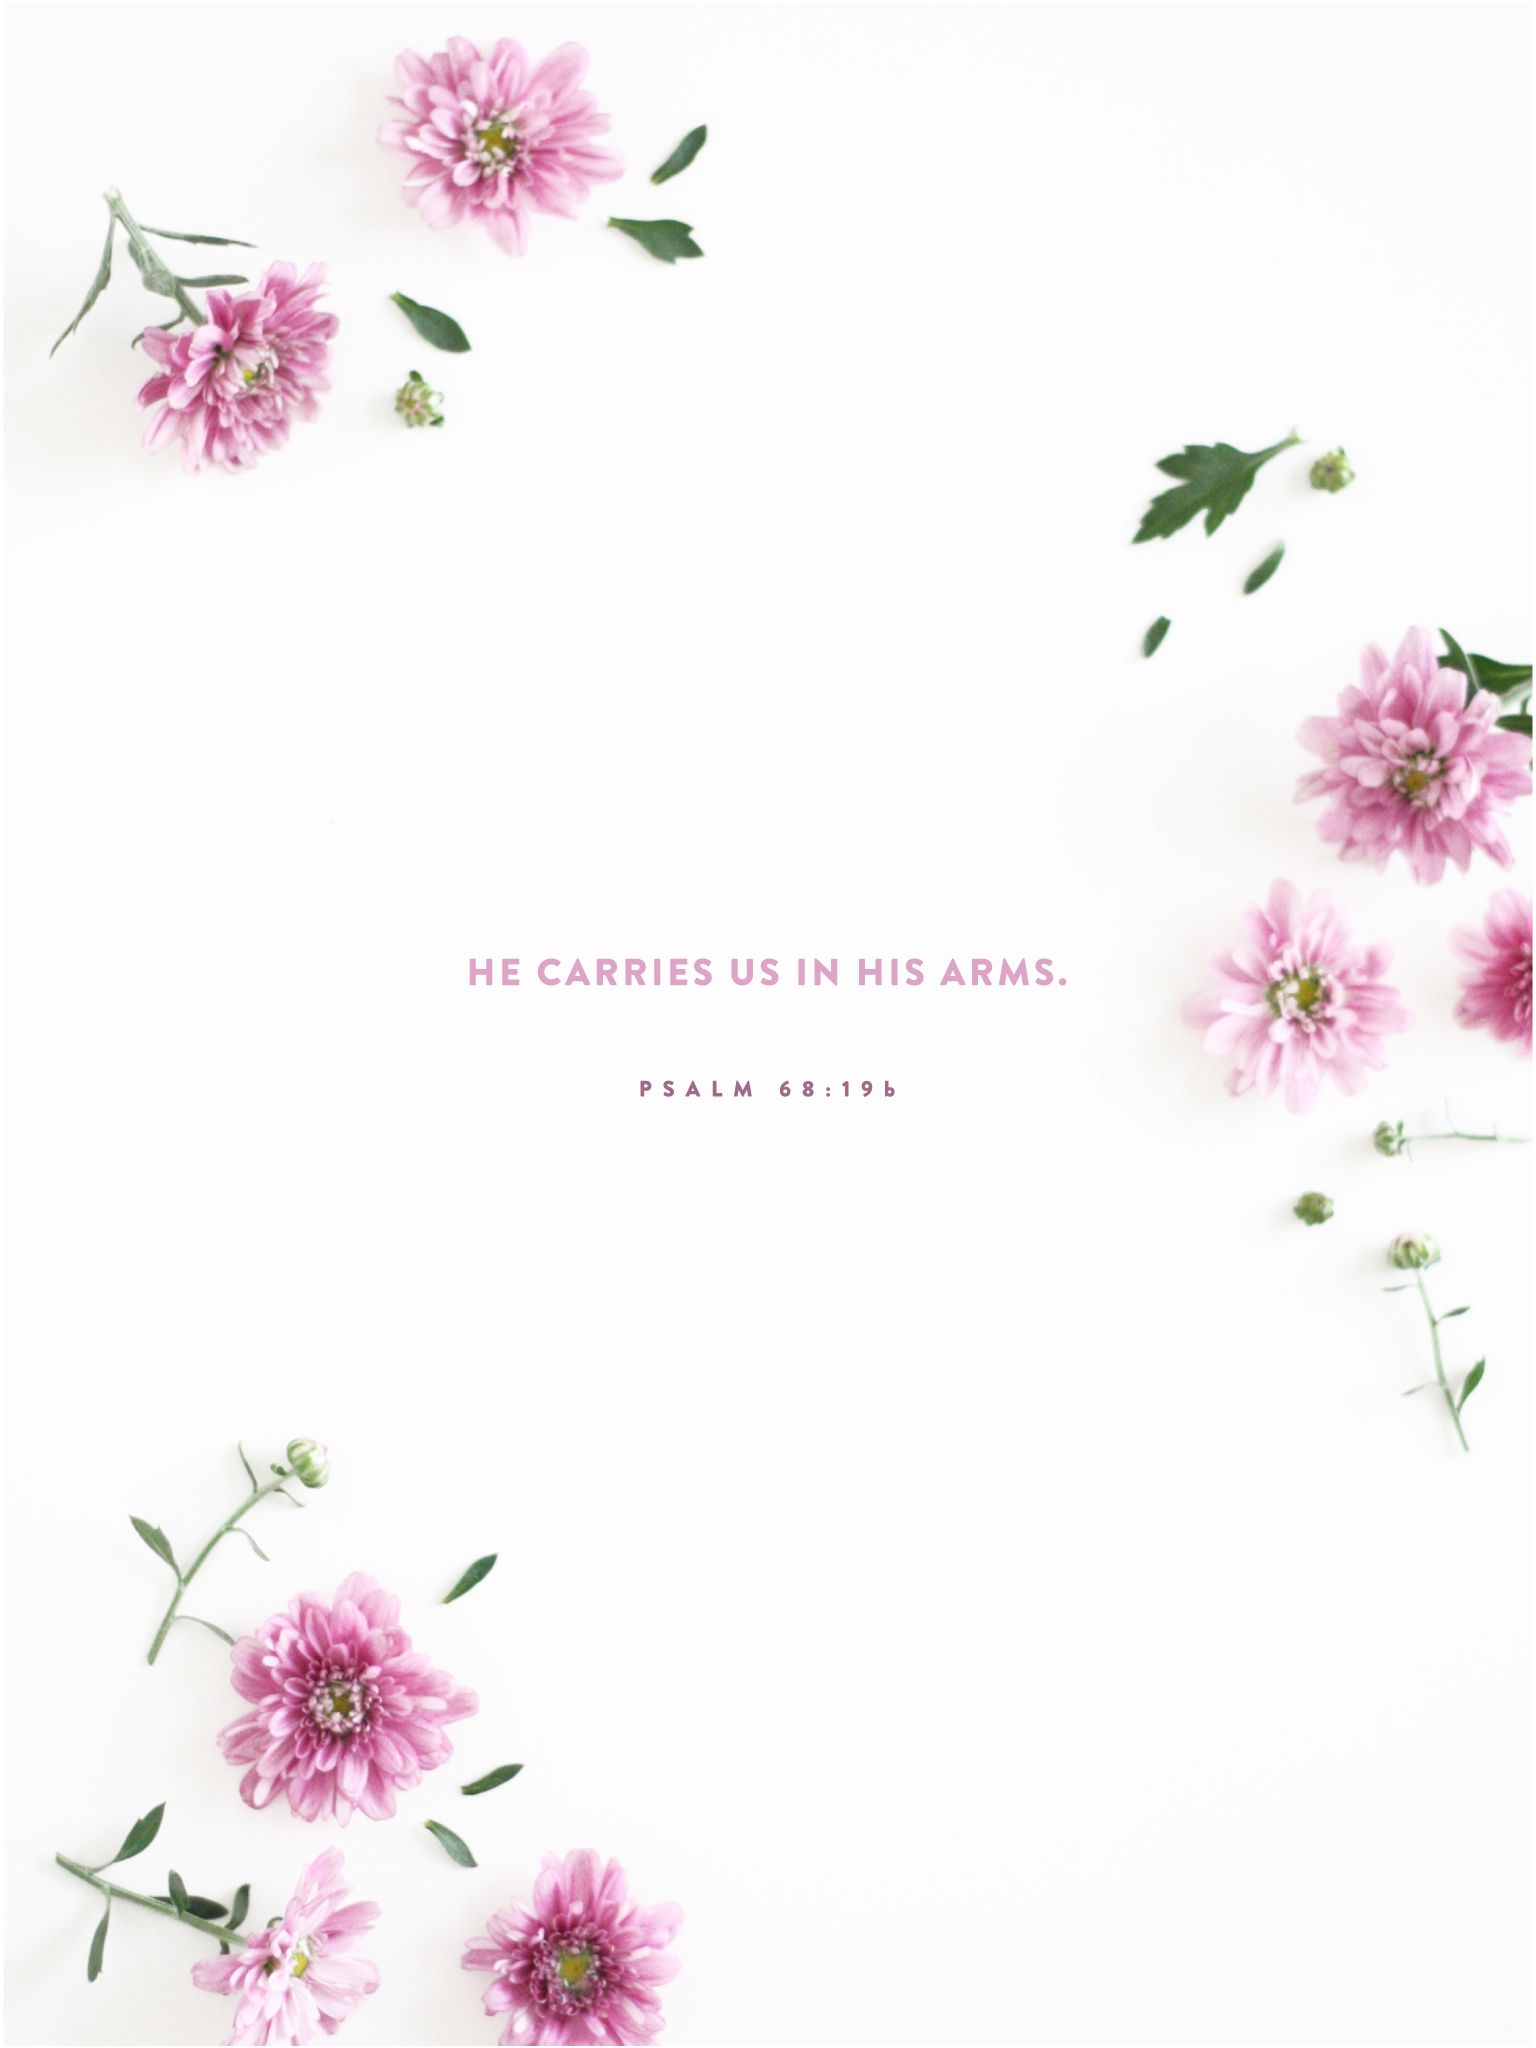 Wallpaper With Bible Verses